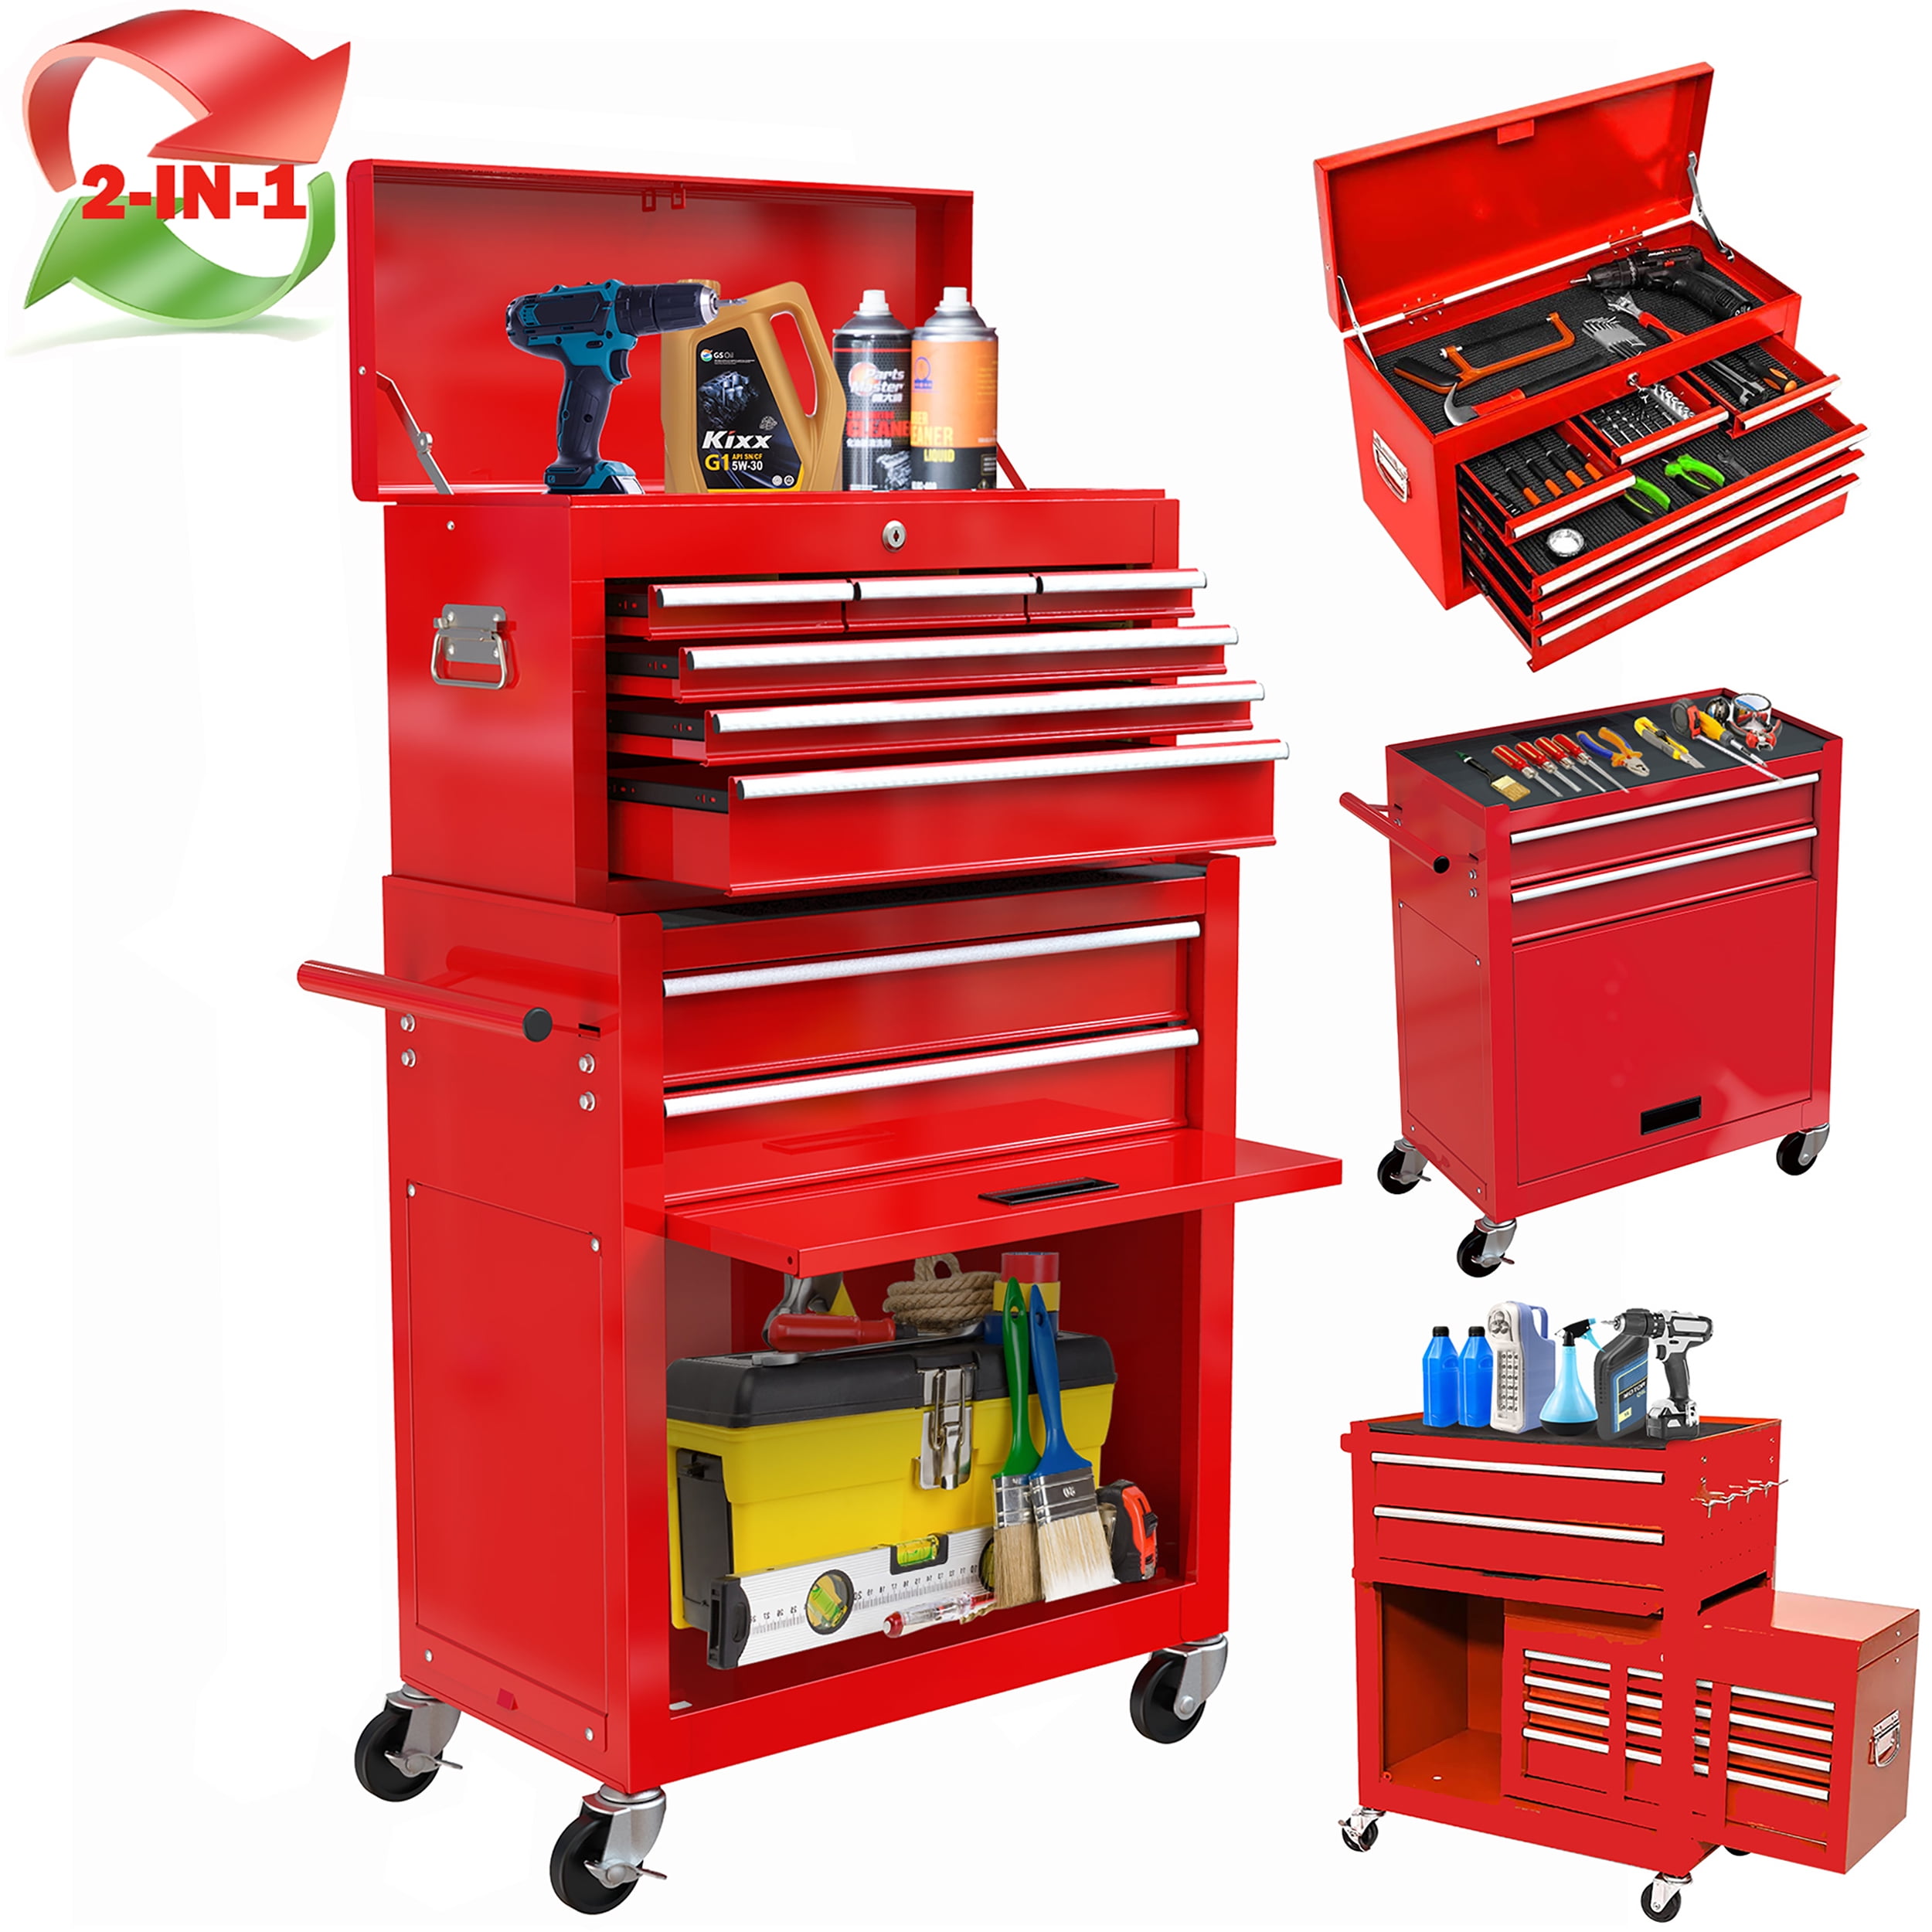 2-IN-1 Rolling Tool Chest, Stainless Steel Tool Organizer Box